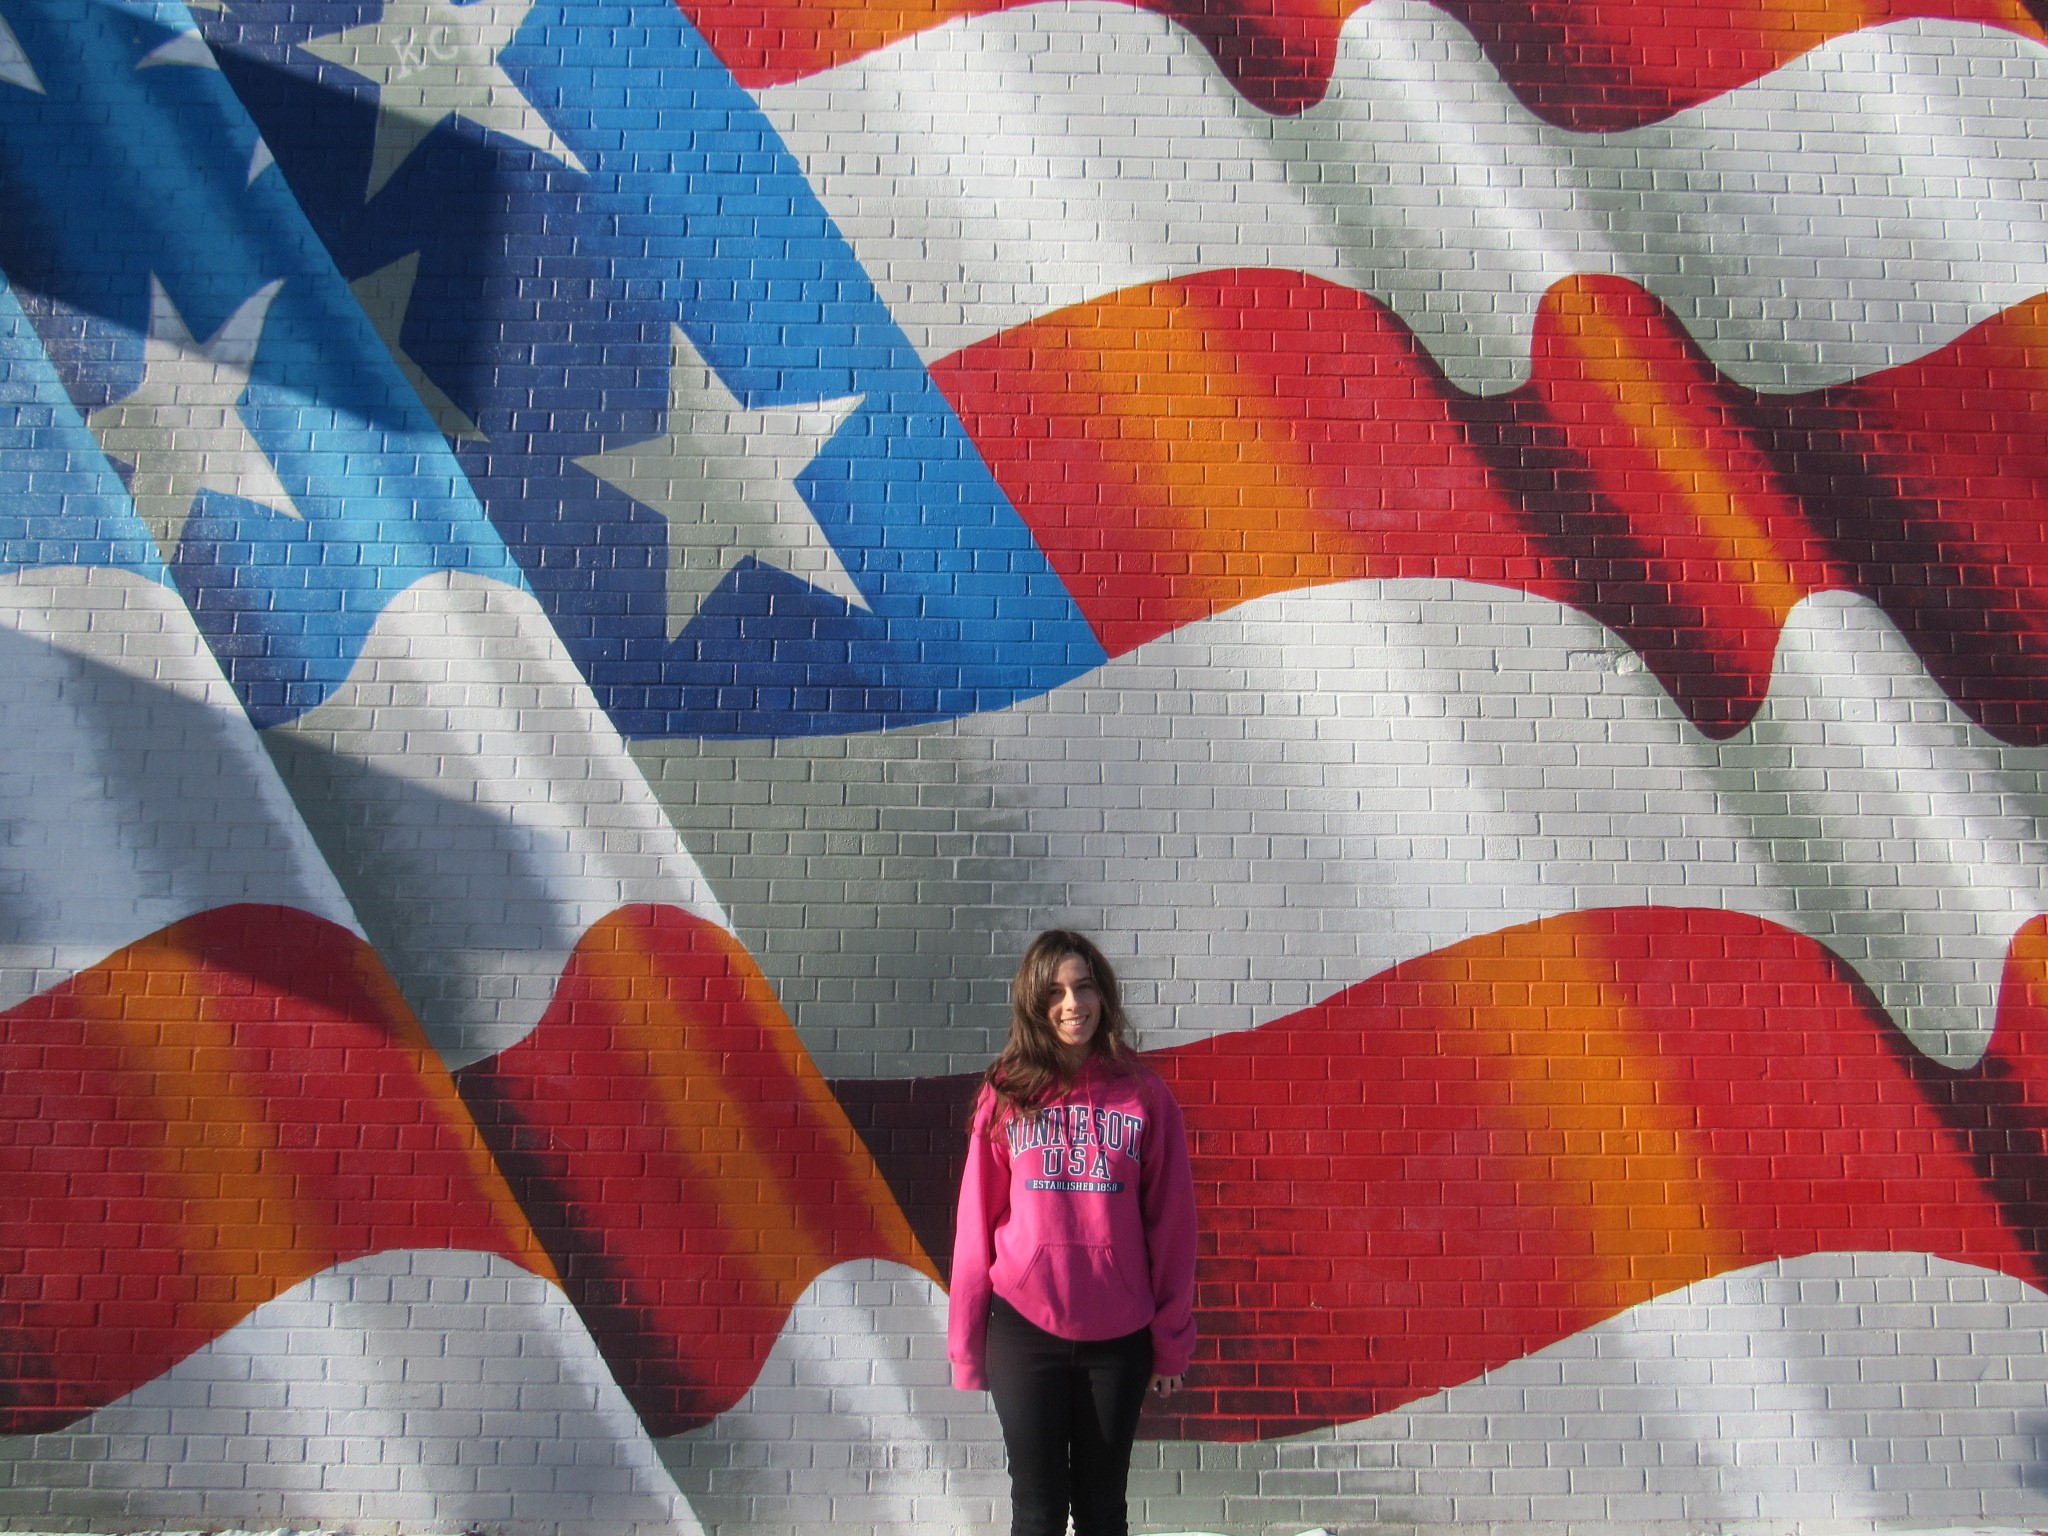 MAria stood in front of an American Flag wall artwork